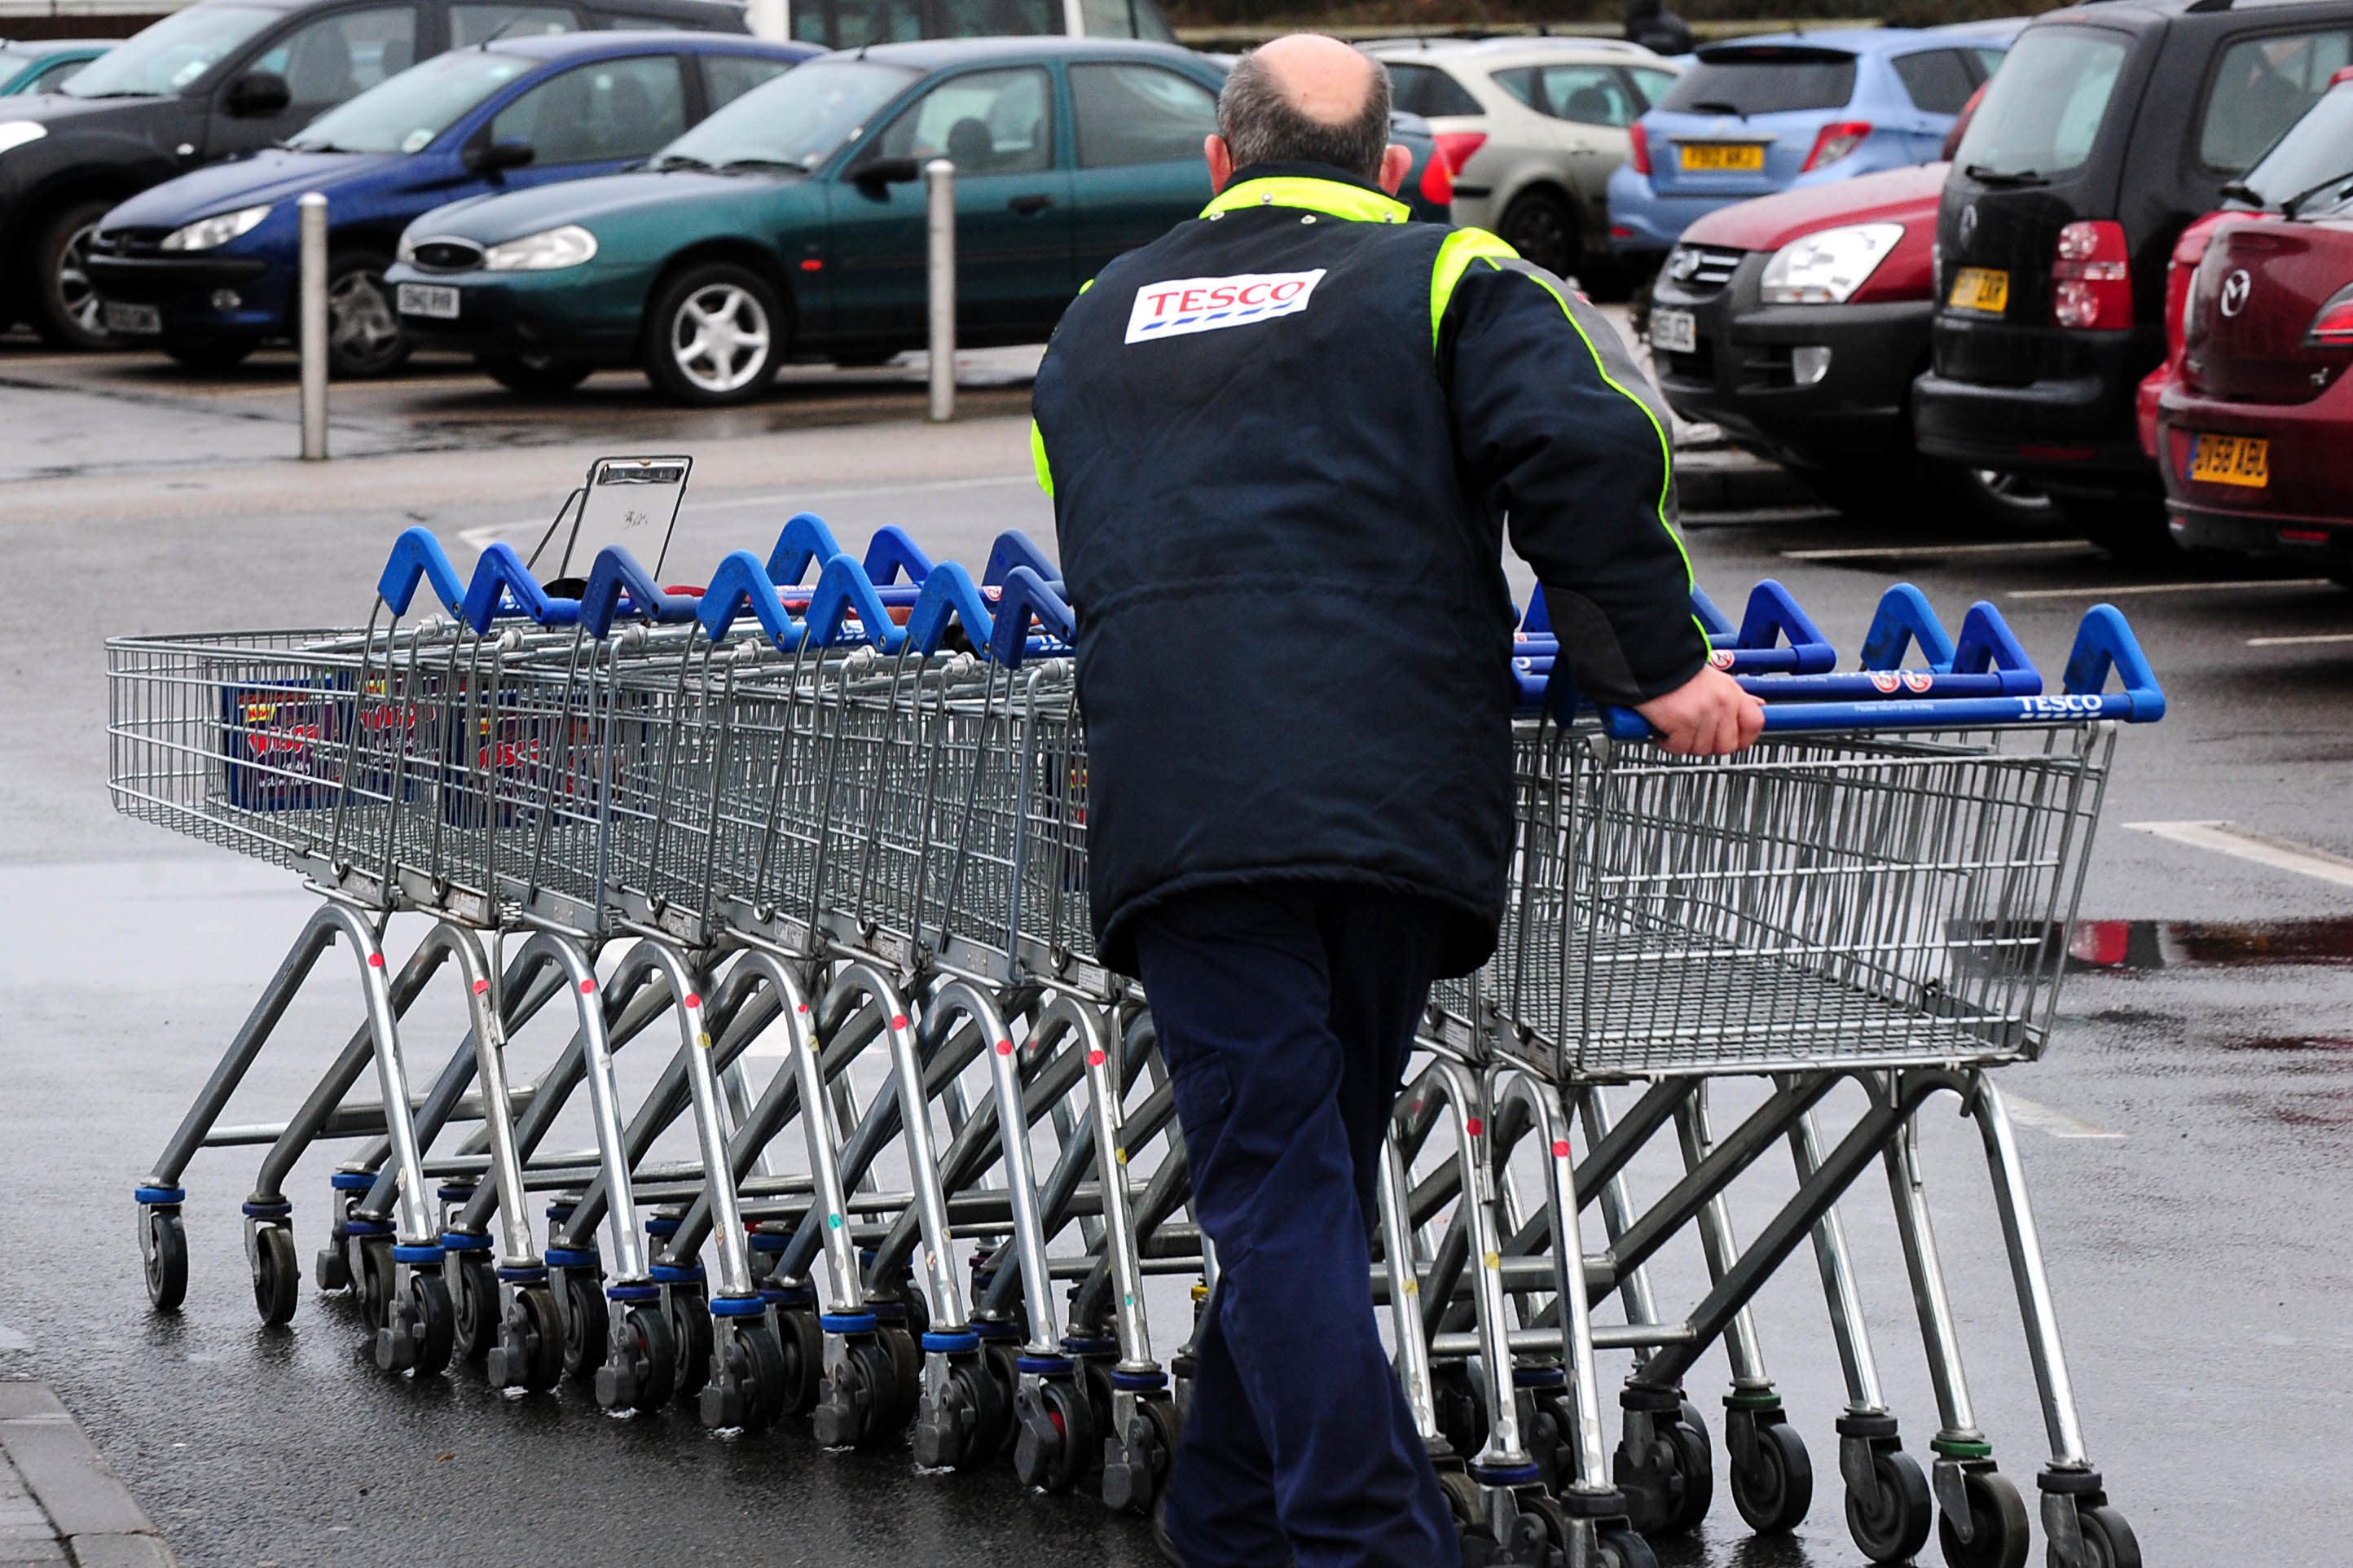 Tesco has cut its full year forecast as the cost of living crisis bites